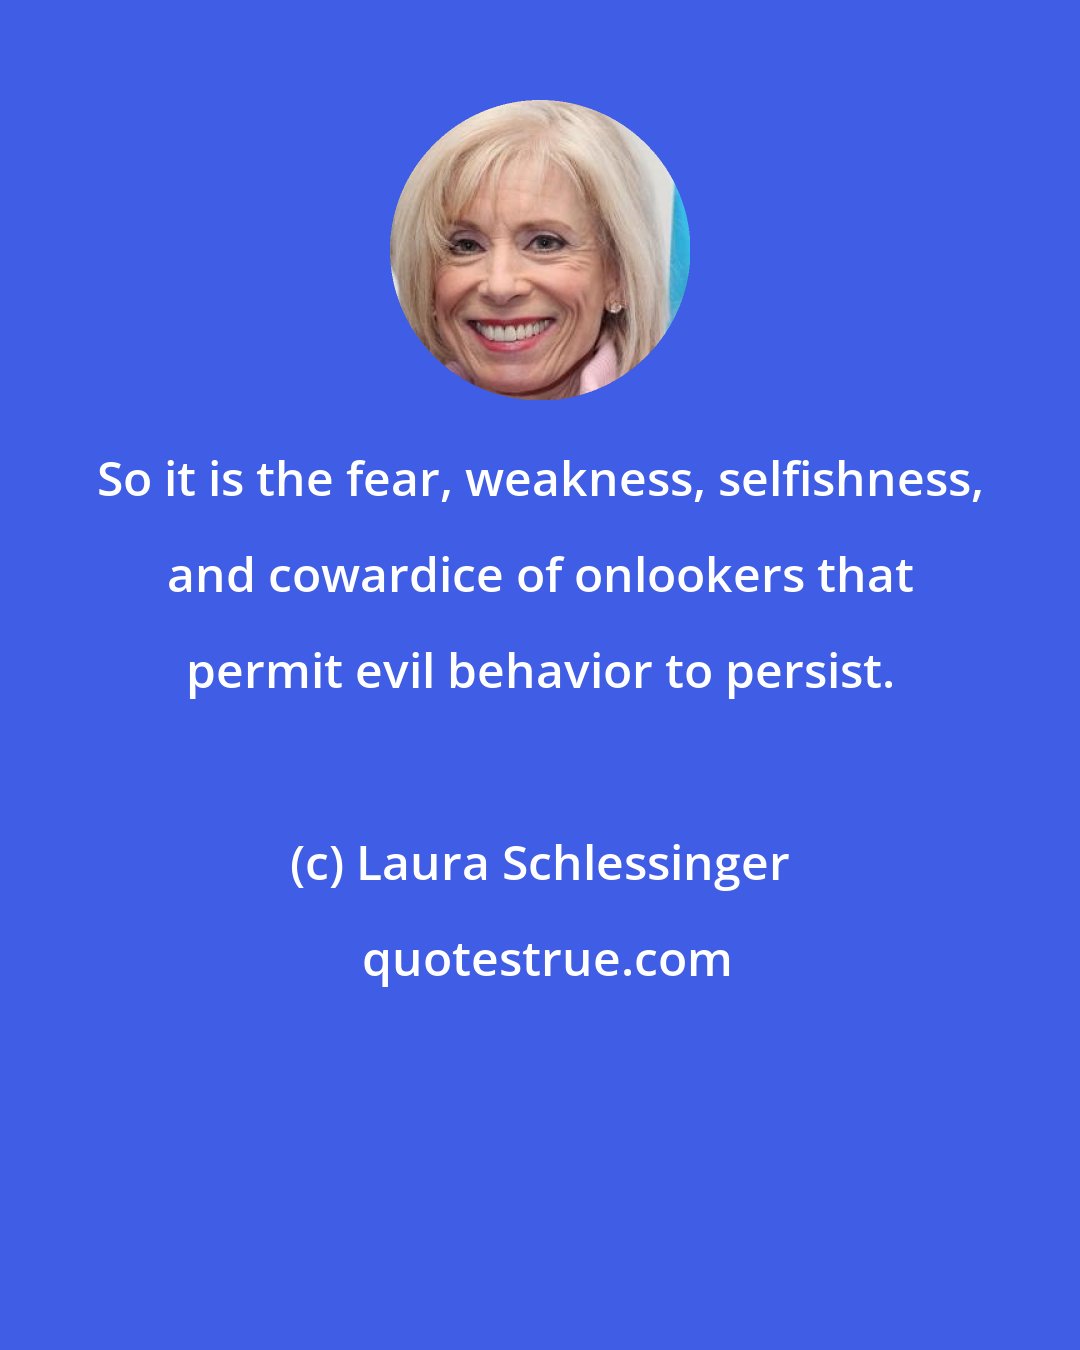 Laura Schlessinger: So it is the fear, weakness, selfishness, and cowardice of onlookers that permit evil behavior to persist.